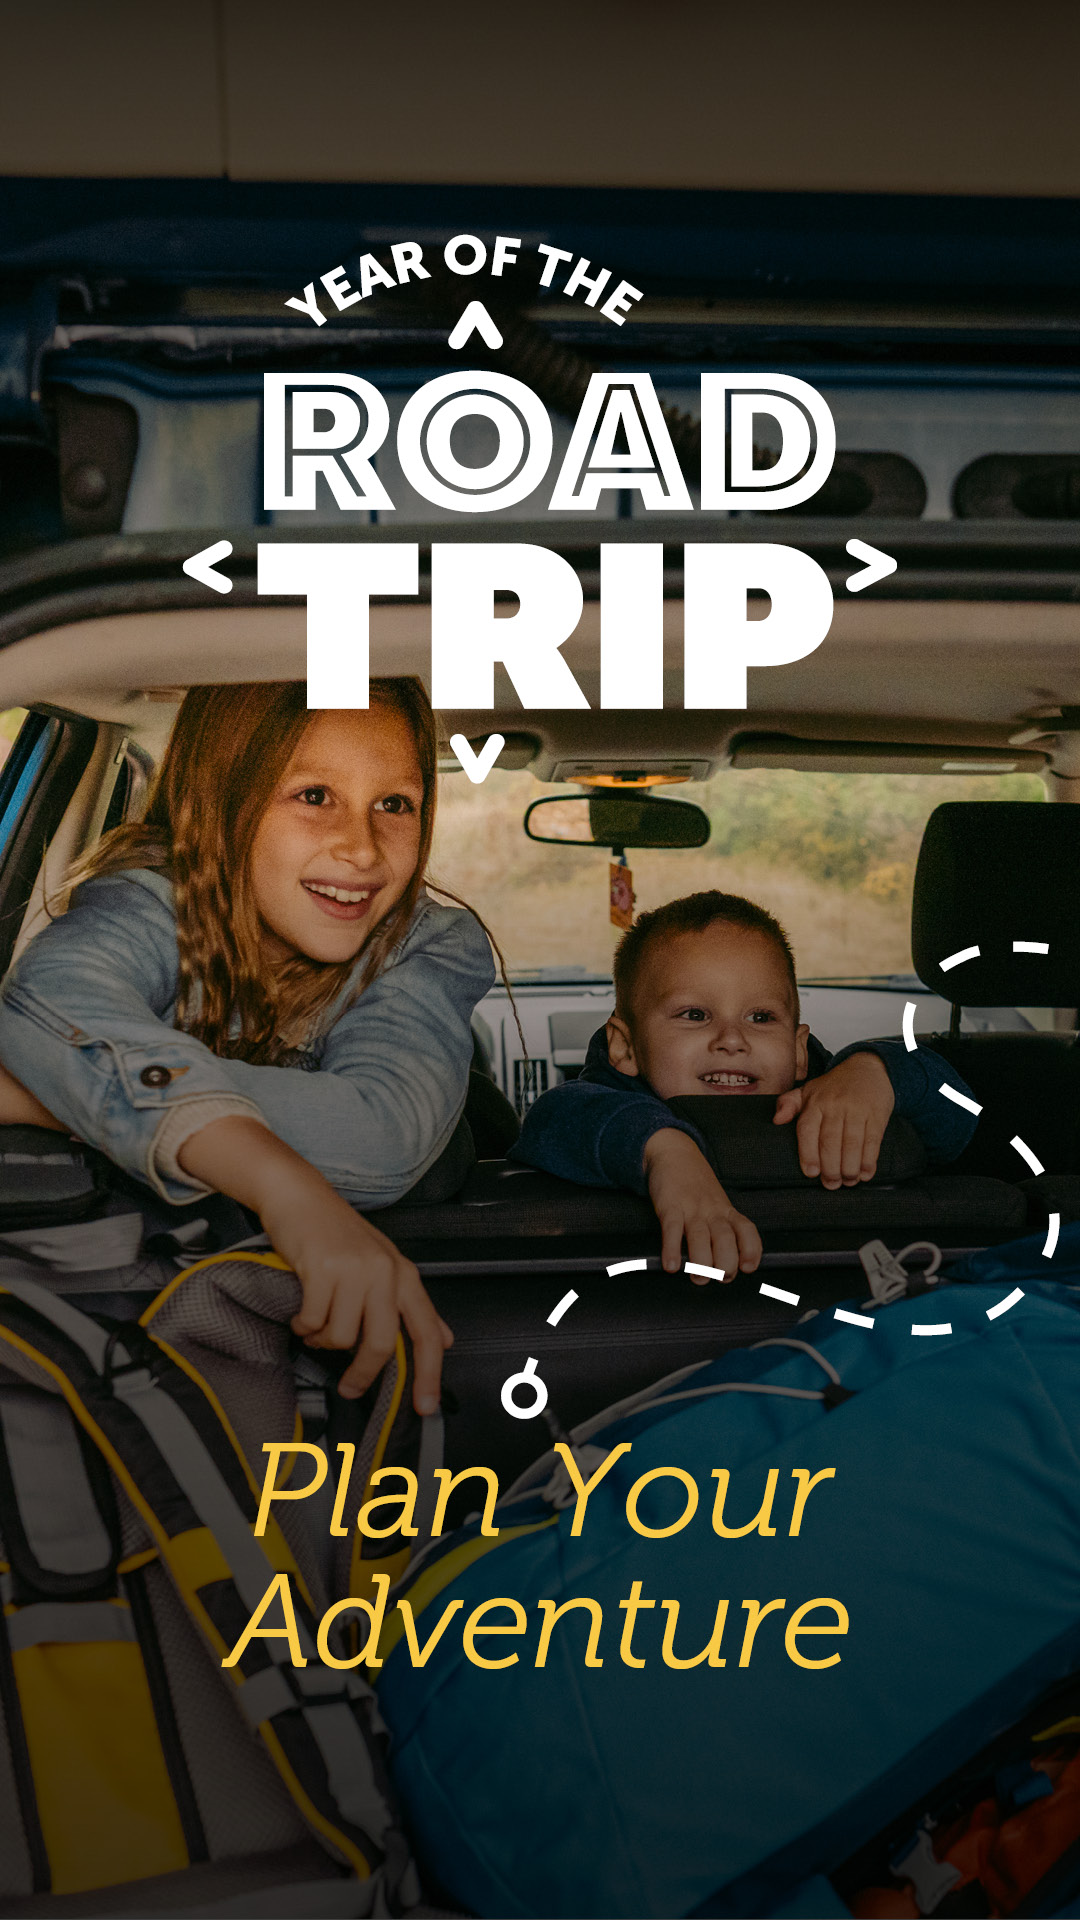 Year of the Road Trip Instagram story graphic